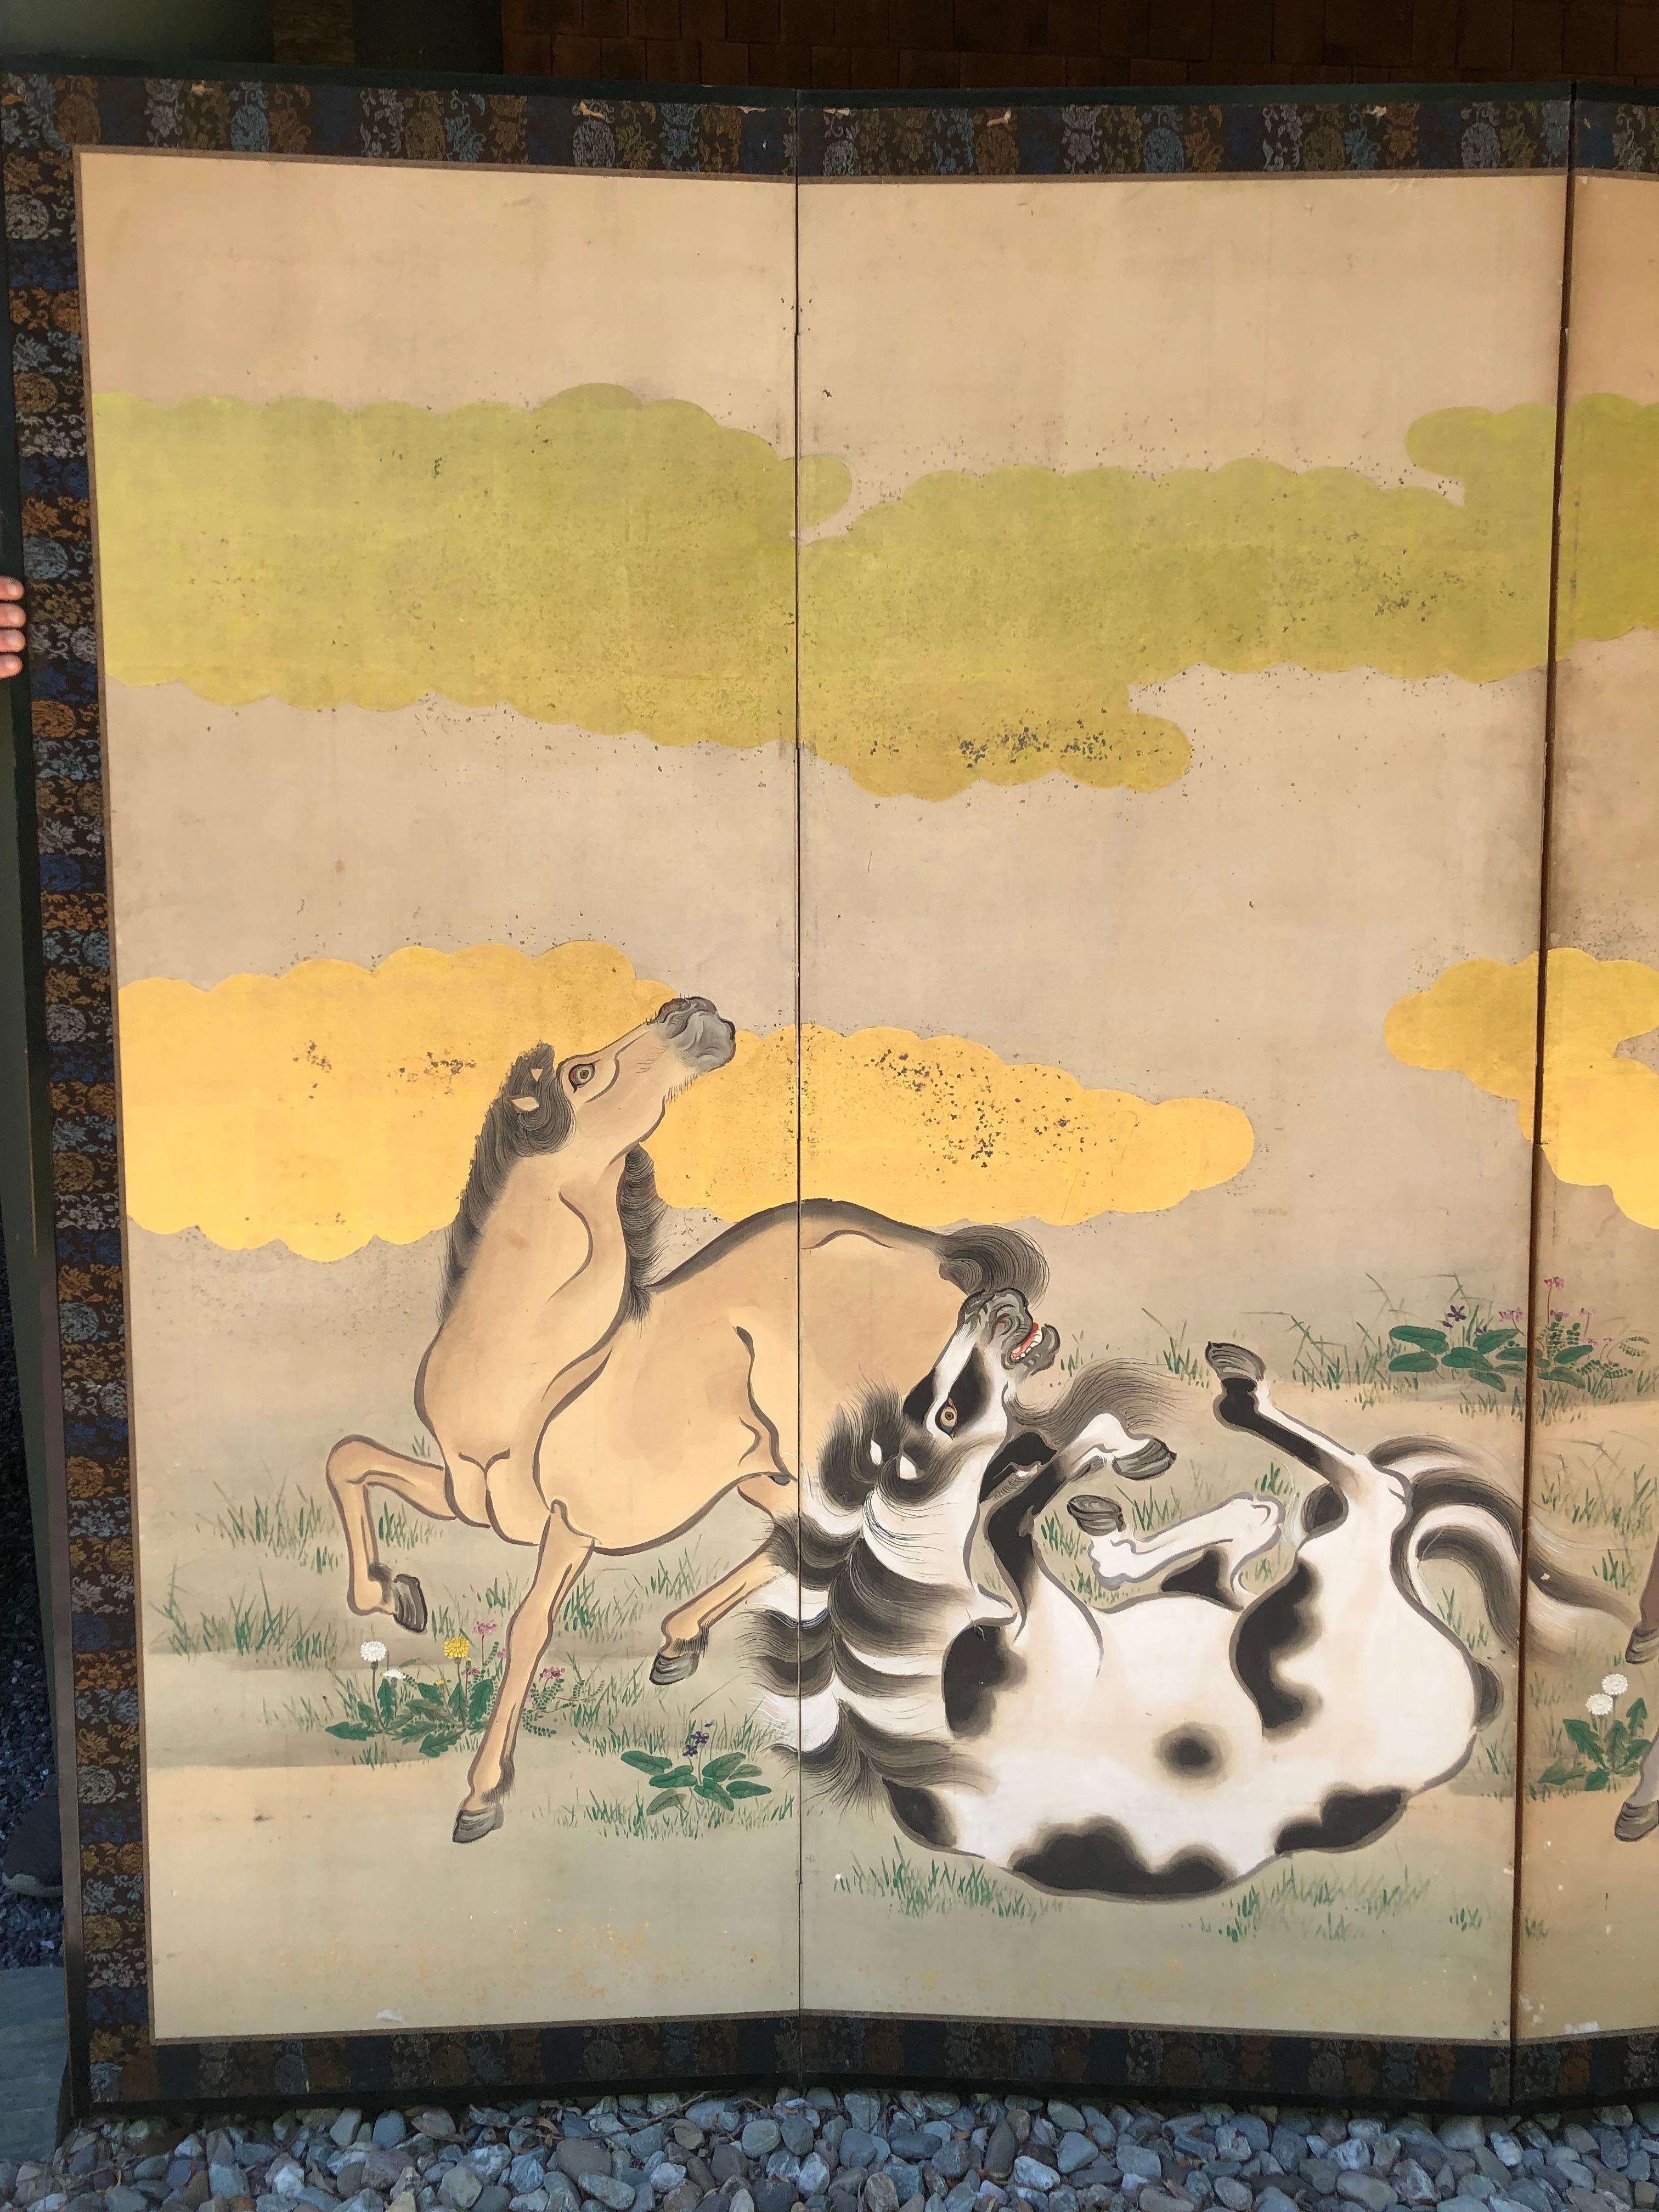 8 magnificent steeds, 19th century

Japan, a fine six-panel screen Byobu depicting 8 magnificent Horses playfully frolicking against a gold filled cloud background. This attractive screen dates to the Meiji period, circa 1880.

Photographed in